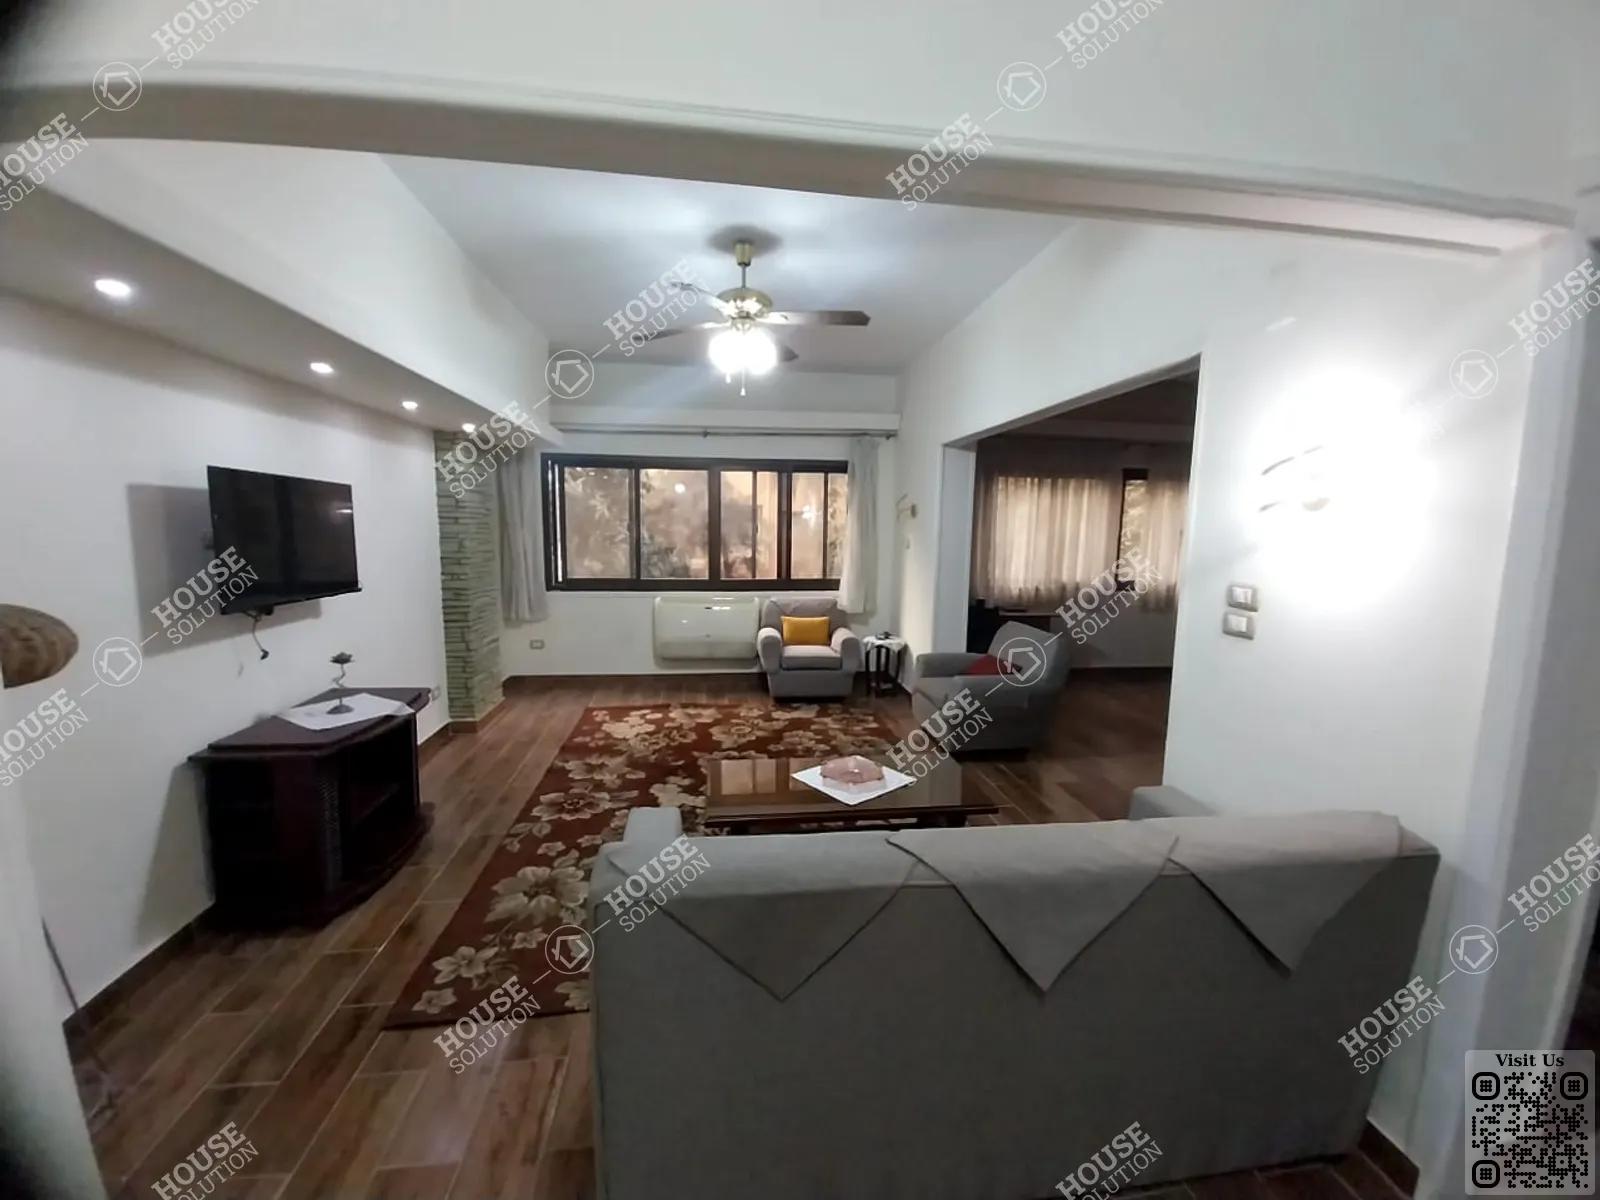 RECEPTION  @ Apartments For Rent In Maadi Maadi Sarayat Area: 125 m² consists of 2 Bedrooms 2 Bathrooms Furnished 5 stars #5837-1